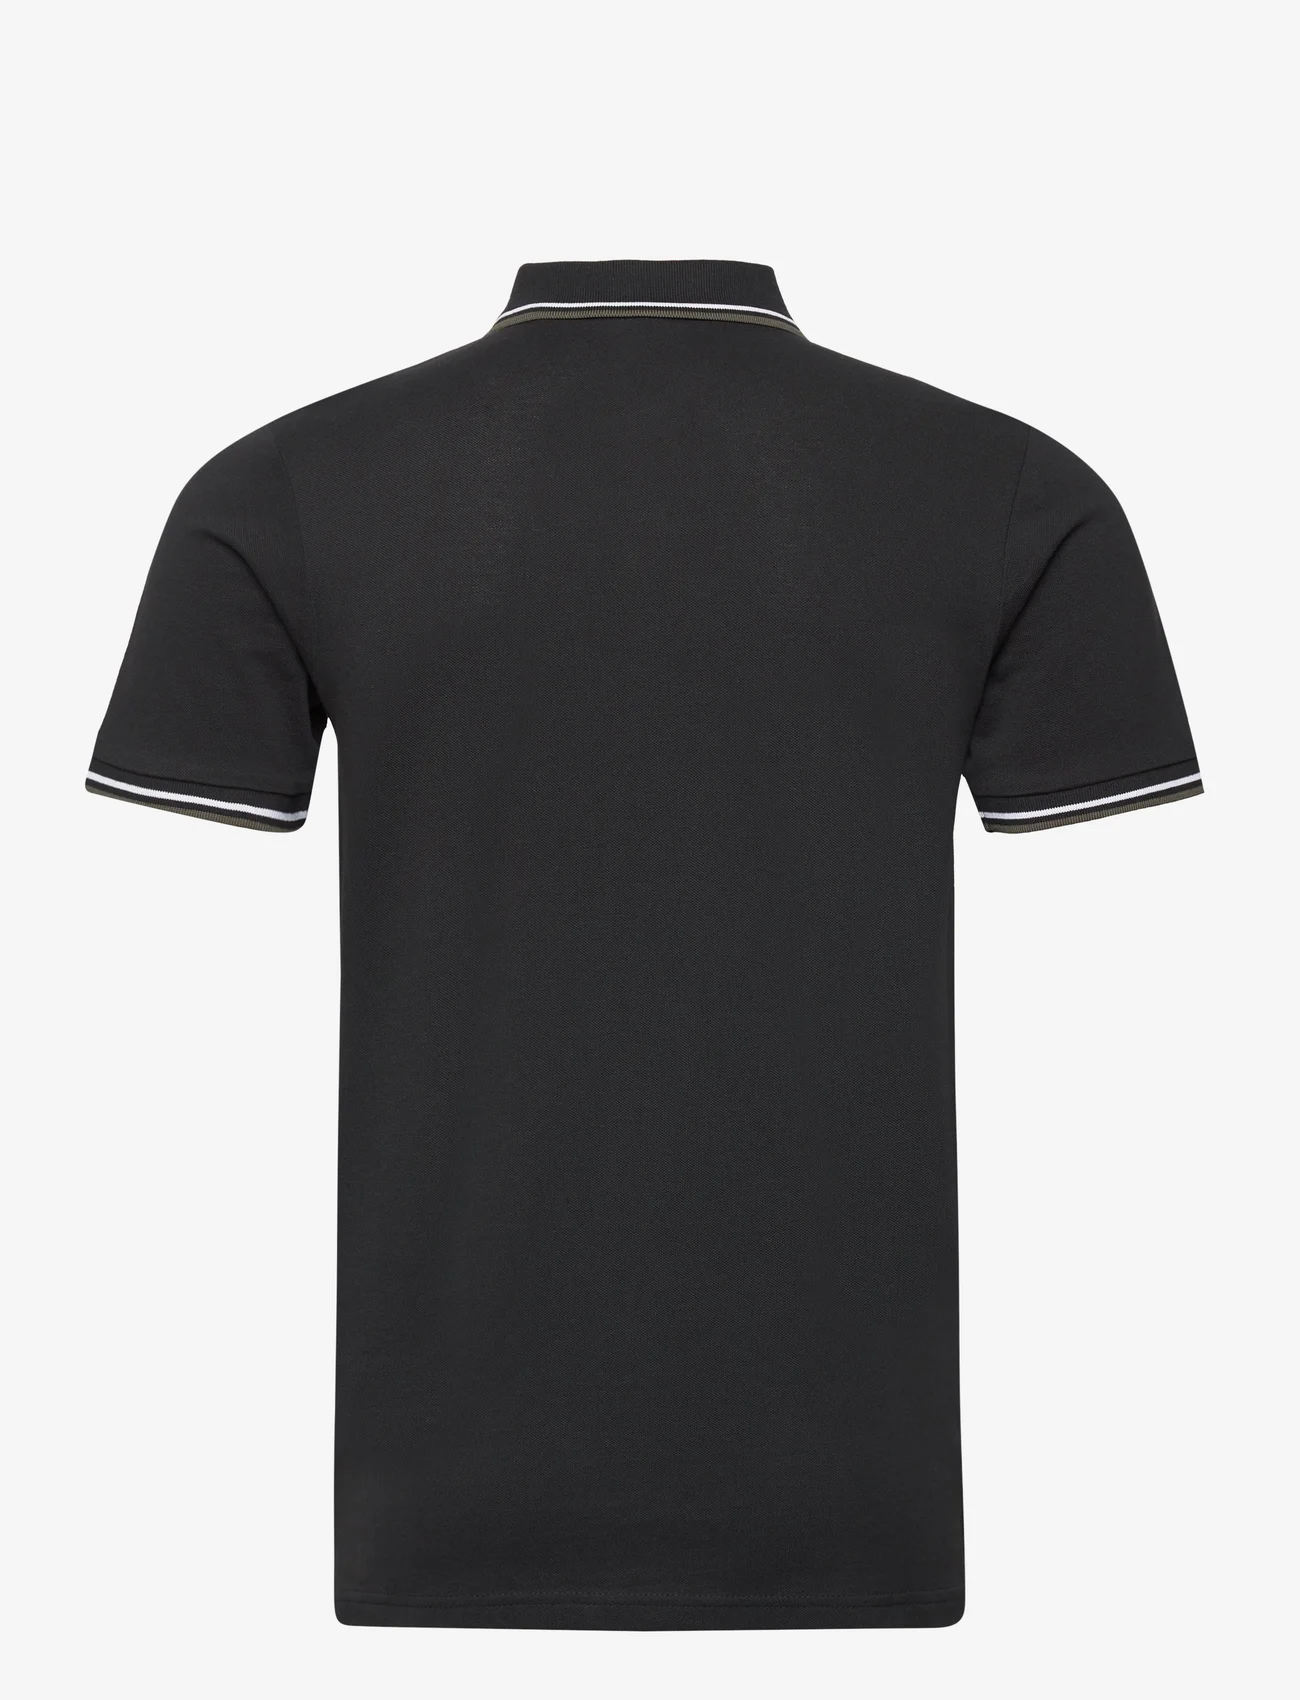 Lindbergh - Polo shirt with contrast piping - die niedrigsten preise - black 124 - 1